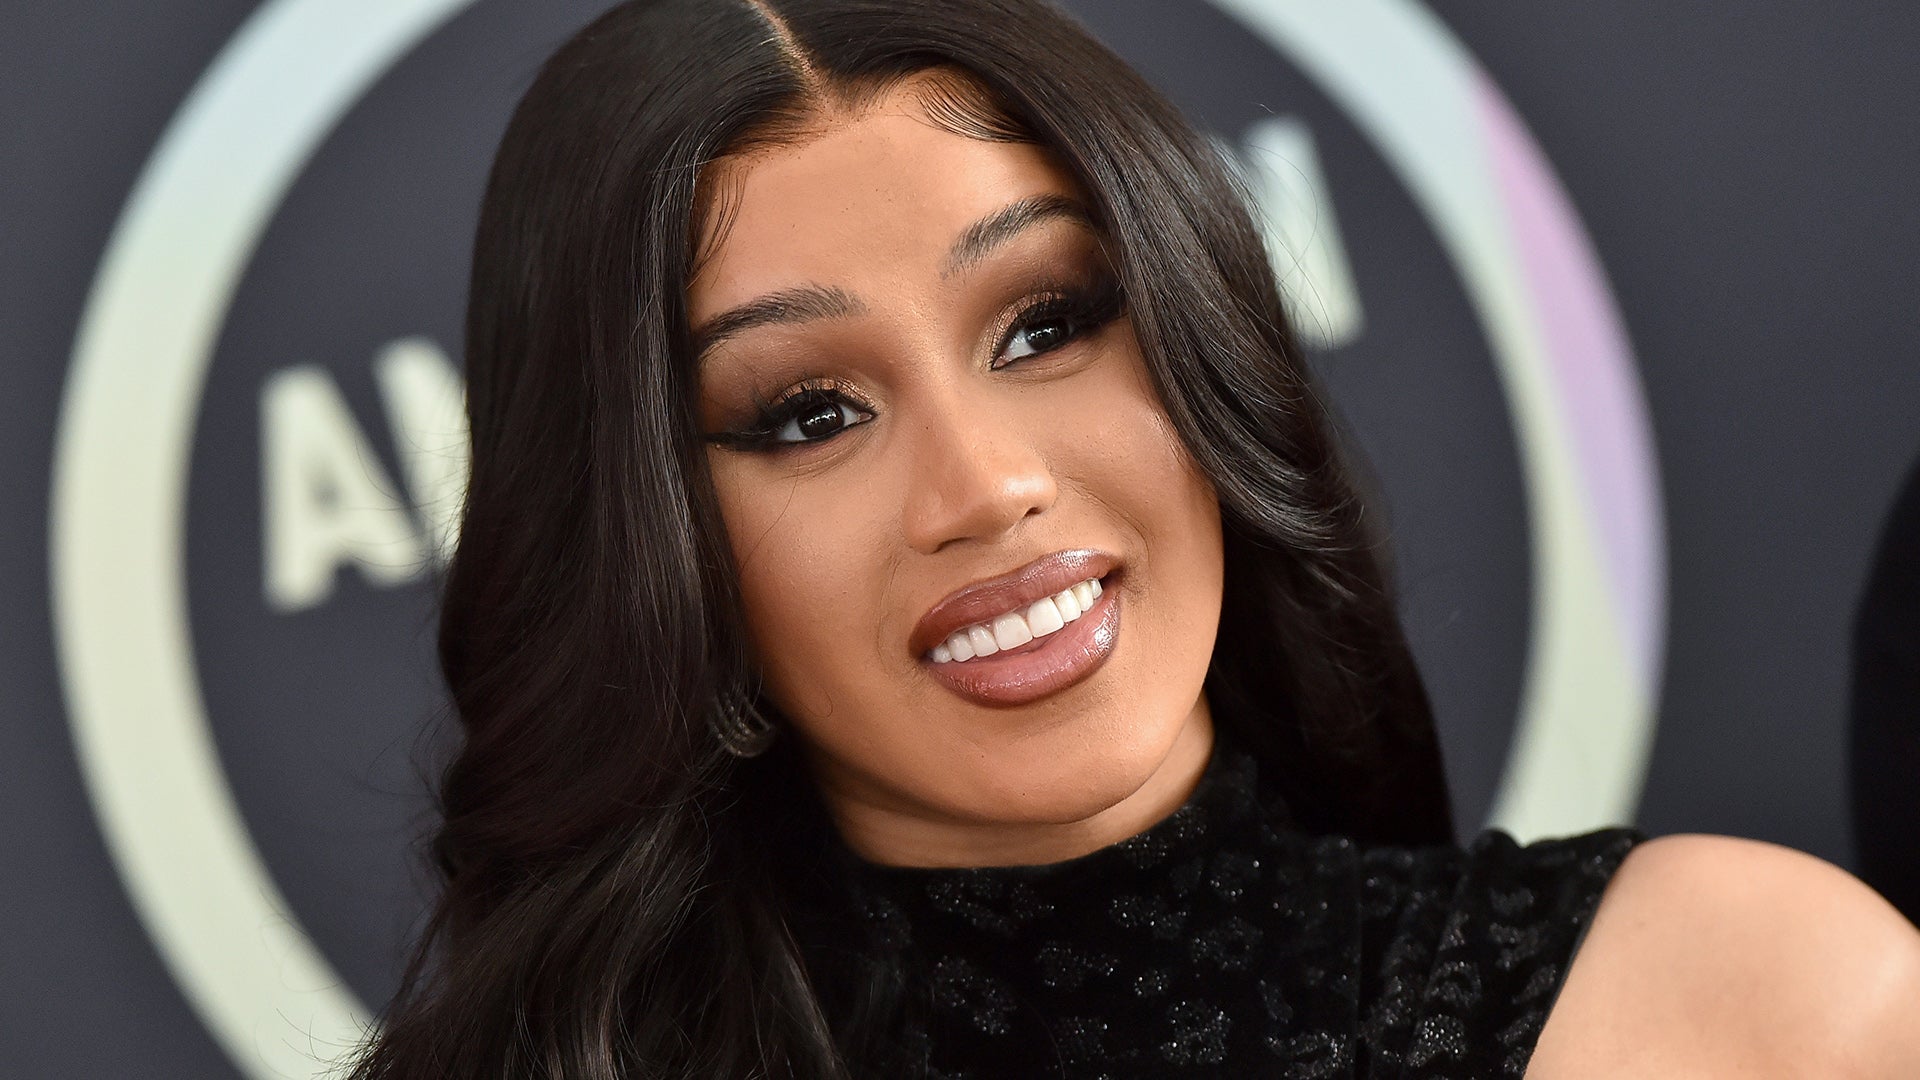 Cardi B Gifts Offset A $2M Check For His 30th Birthday. (Photo)